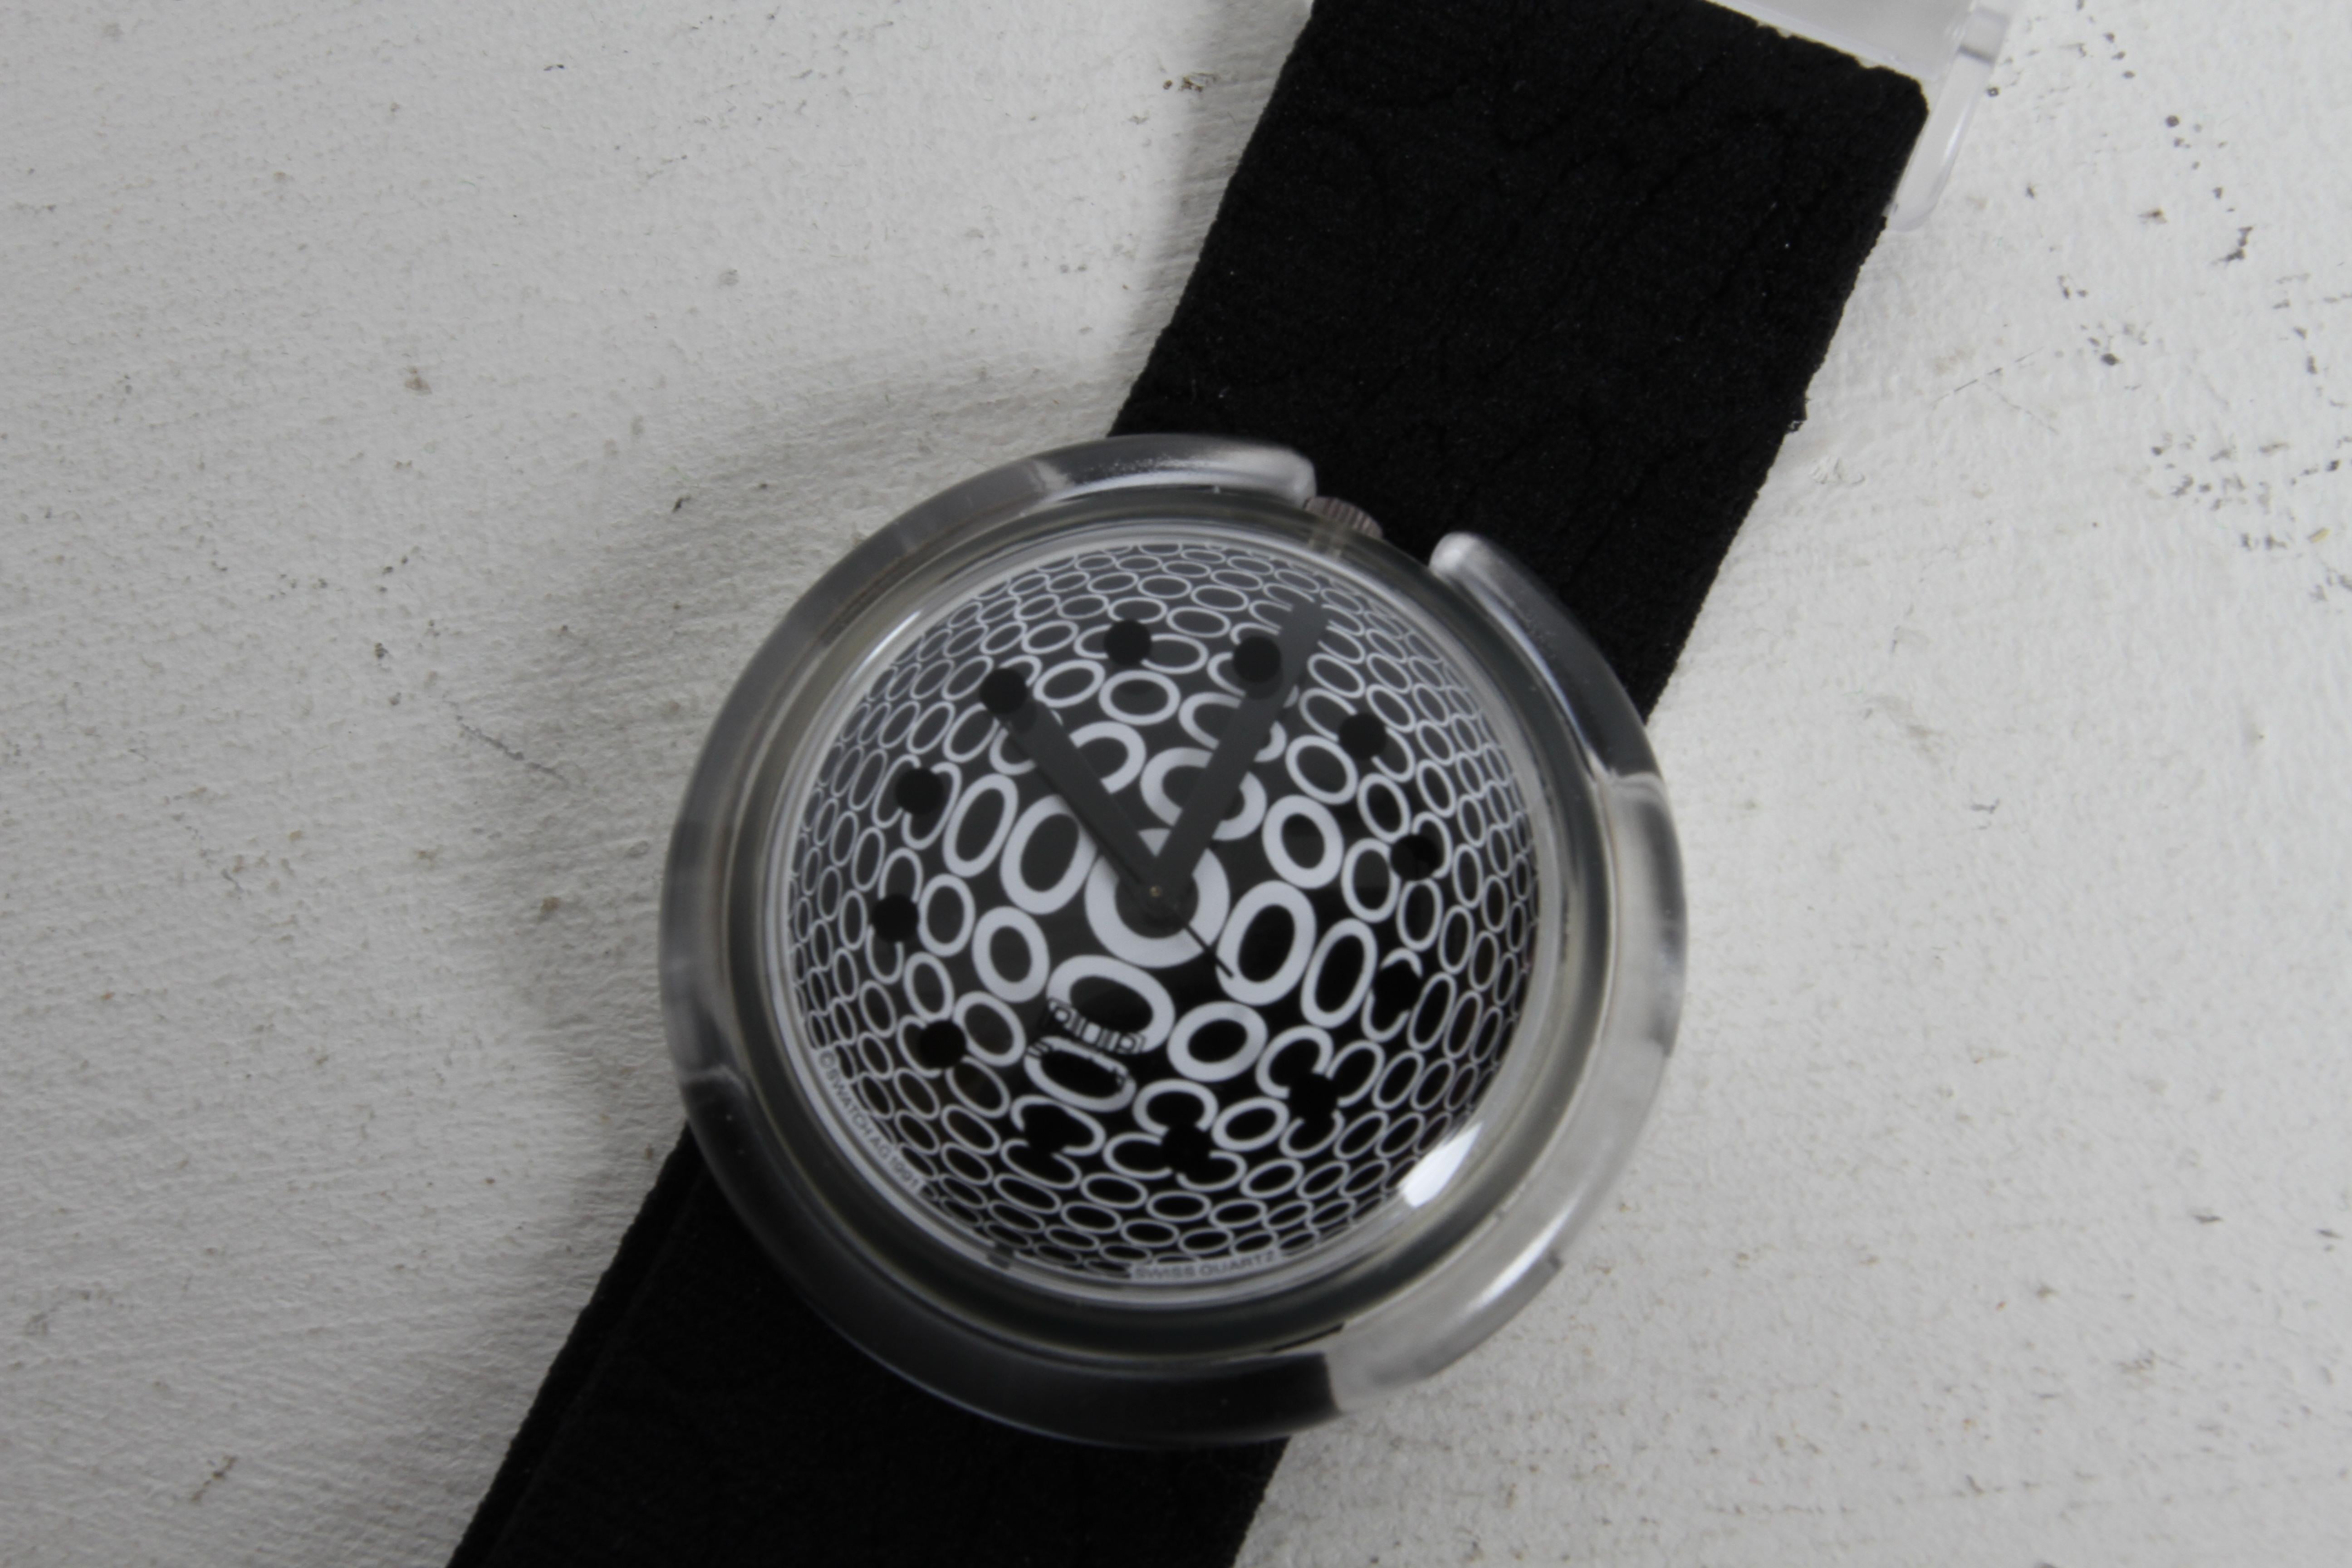 1992 Vintage POP Swatch Watch Special Dots - Op Art - Designed by Vasarely - NOS For Sale 7